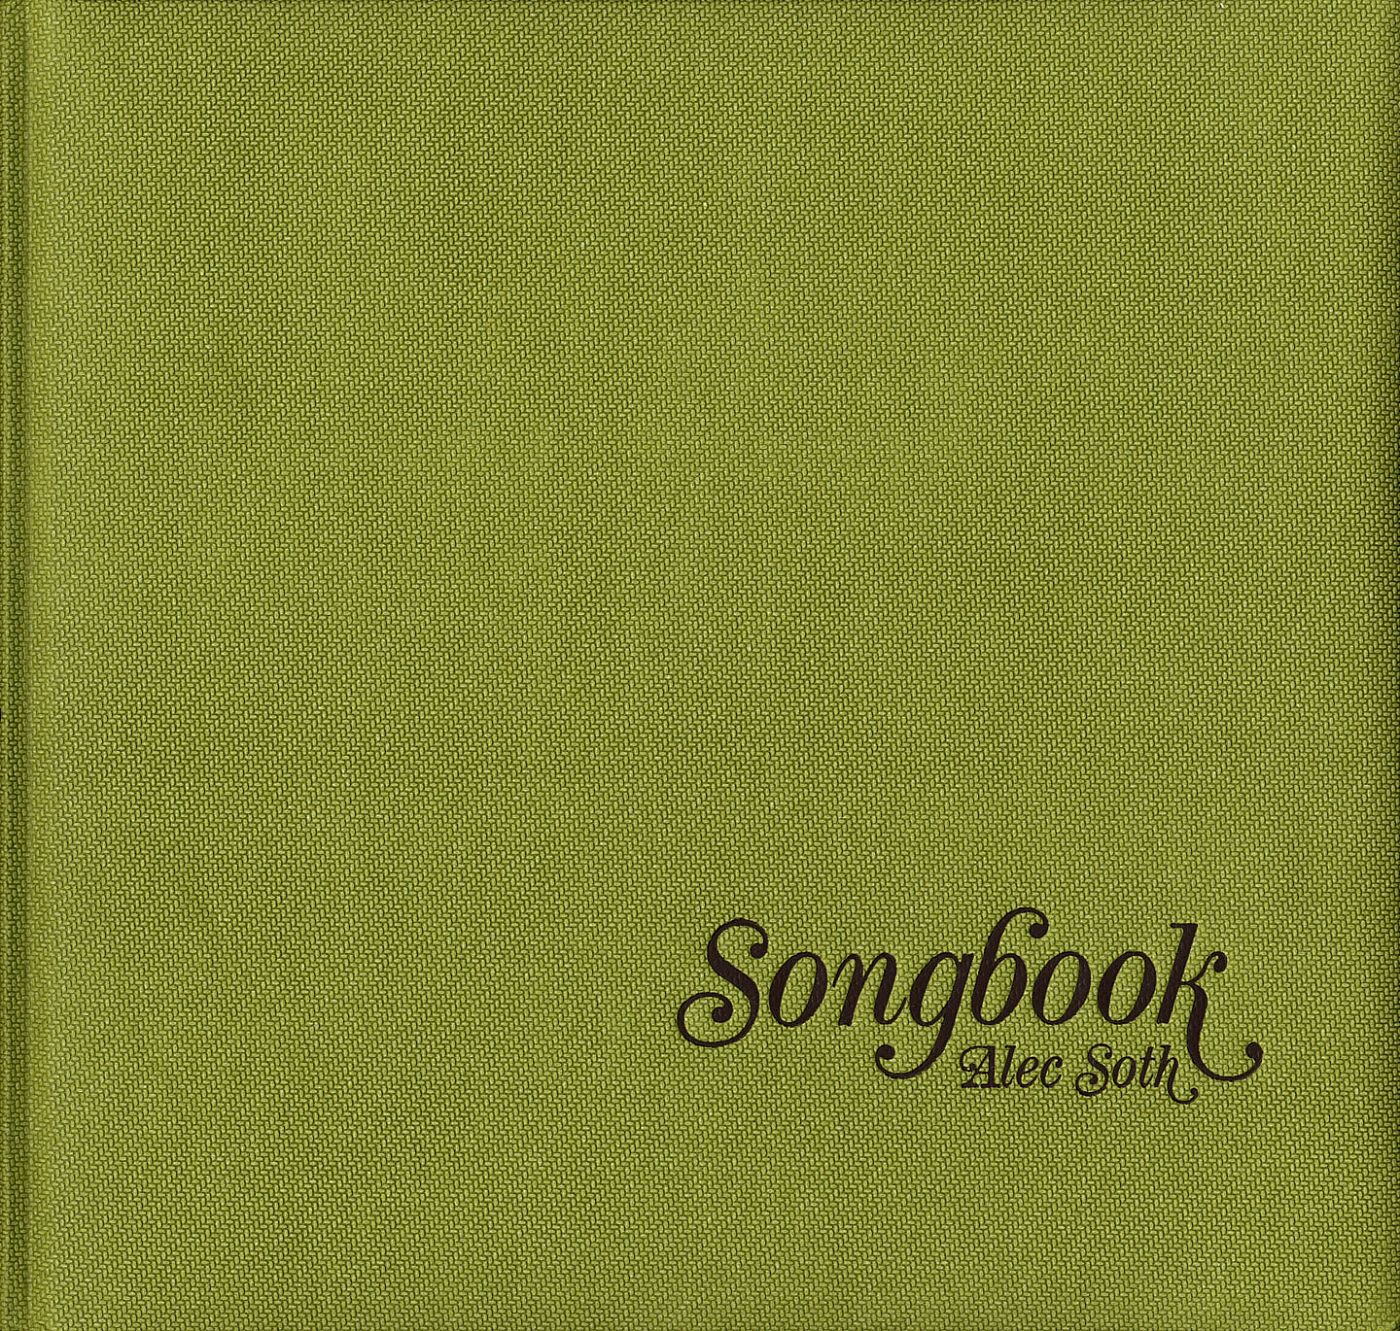 Alec Soth: Songbook (First Printing) [SIGNED]